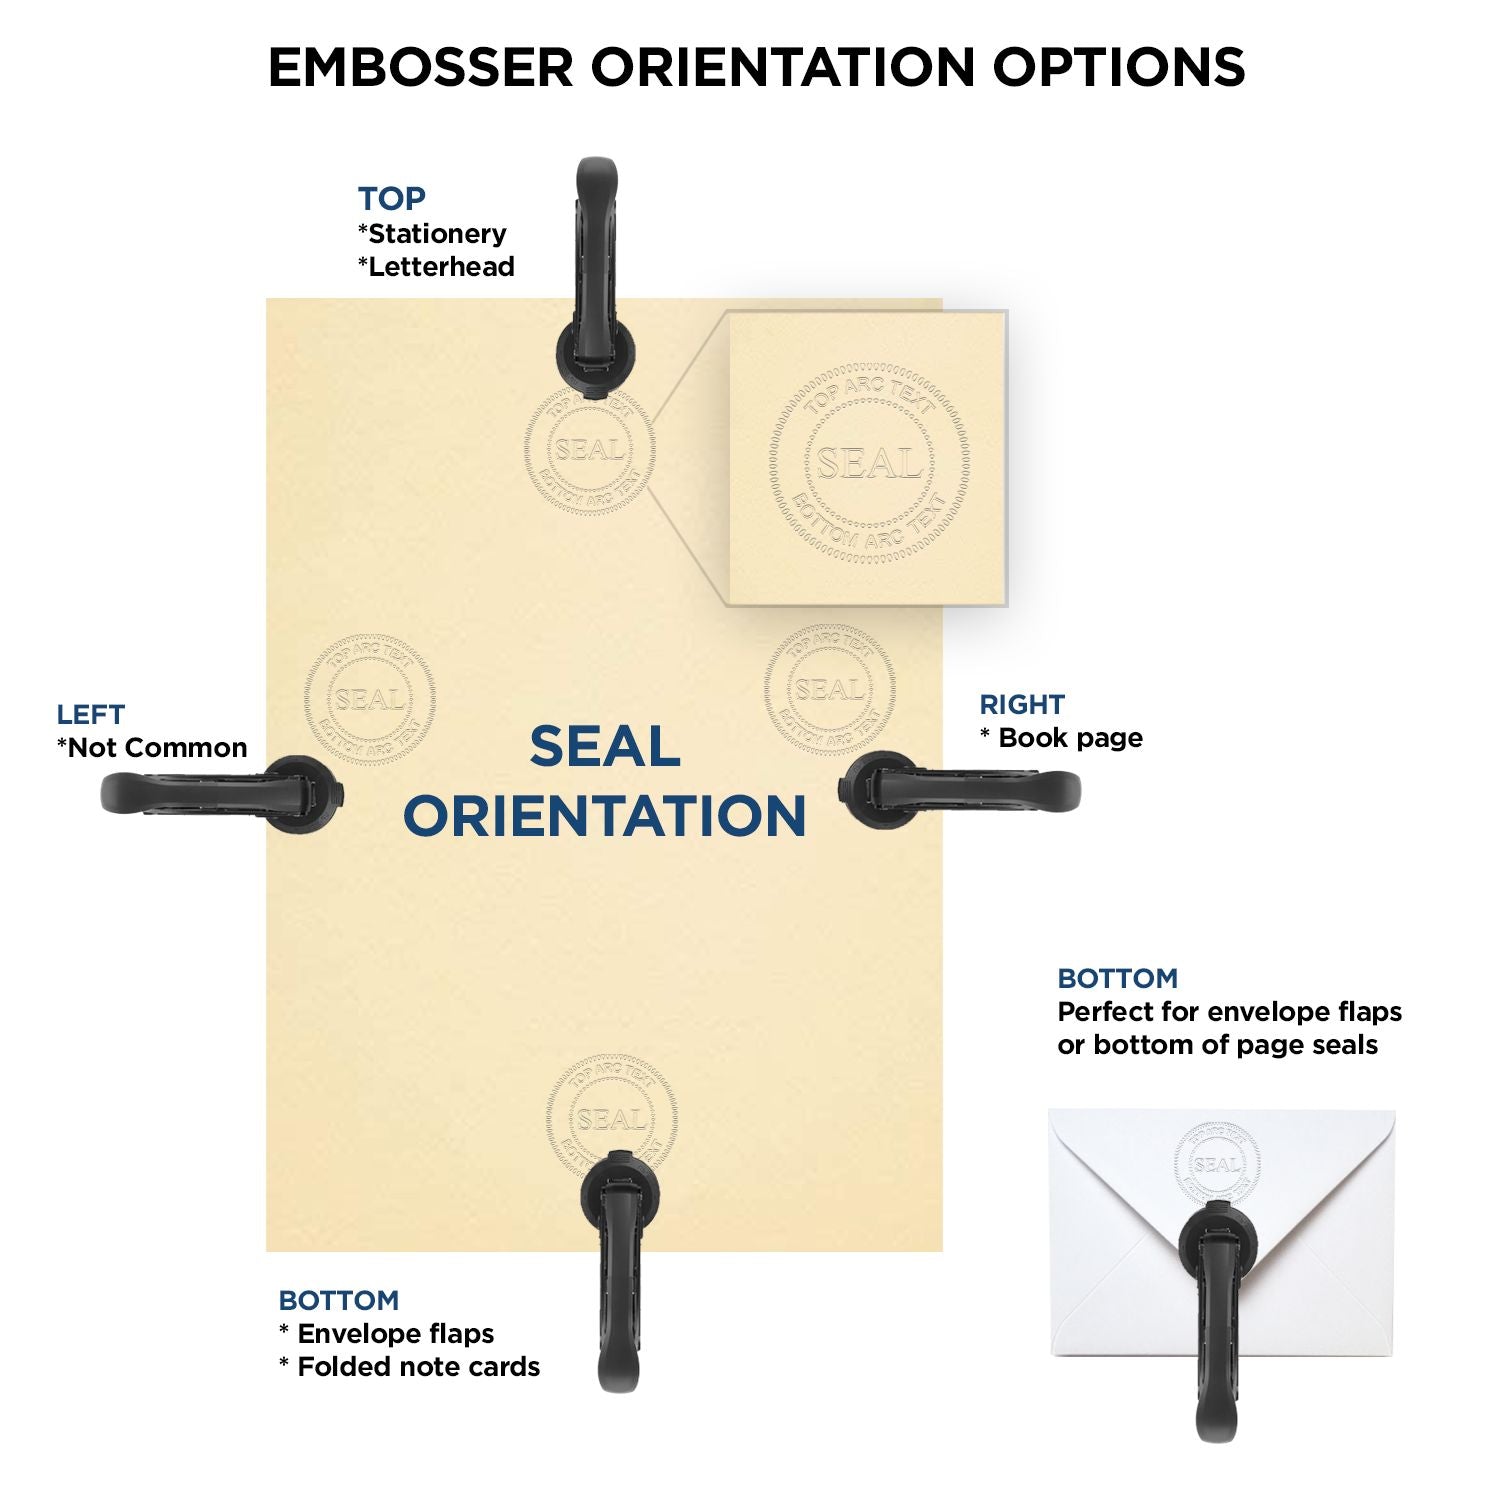 An infographic for the Handheld New York Land Surveyor Seal showing embosser orientation, this is showing examples of a top, bottom, right and left insert.